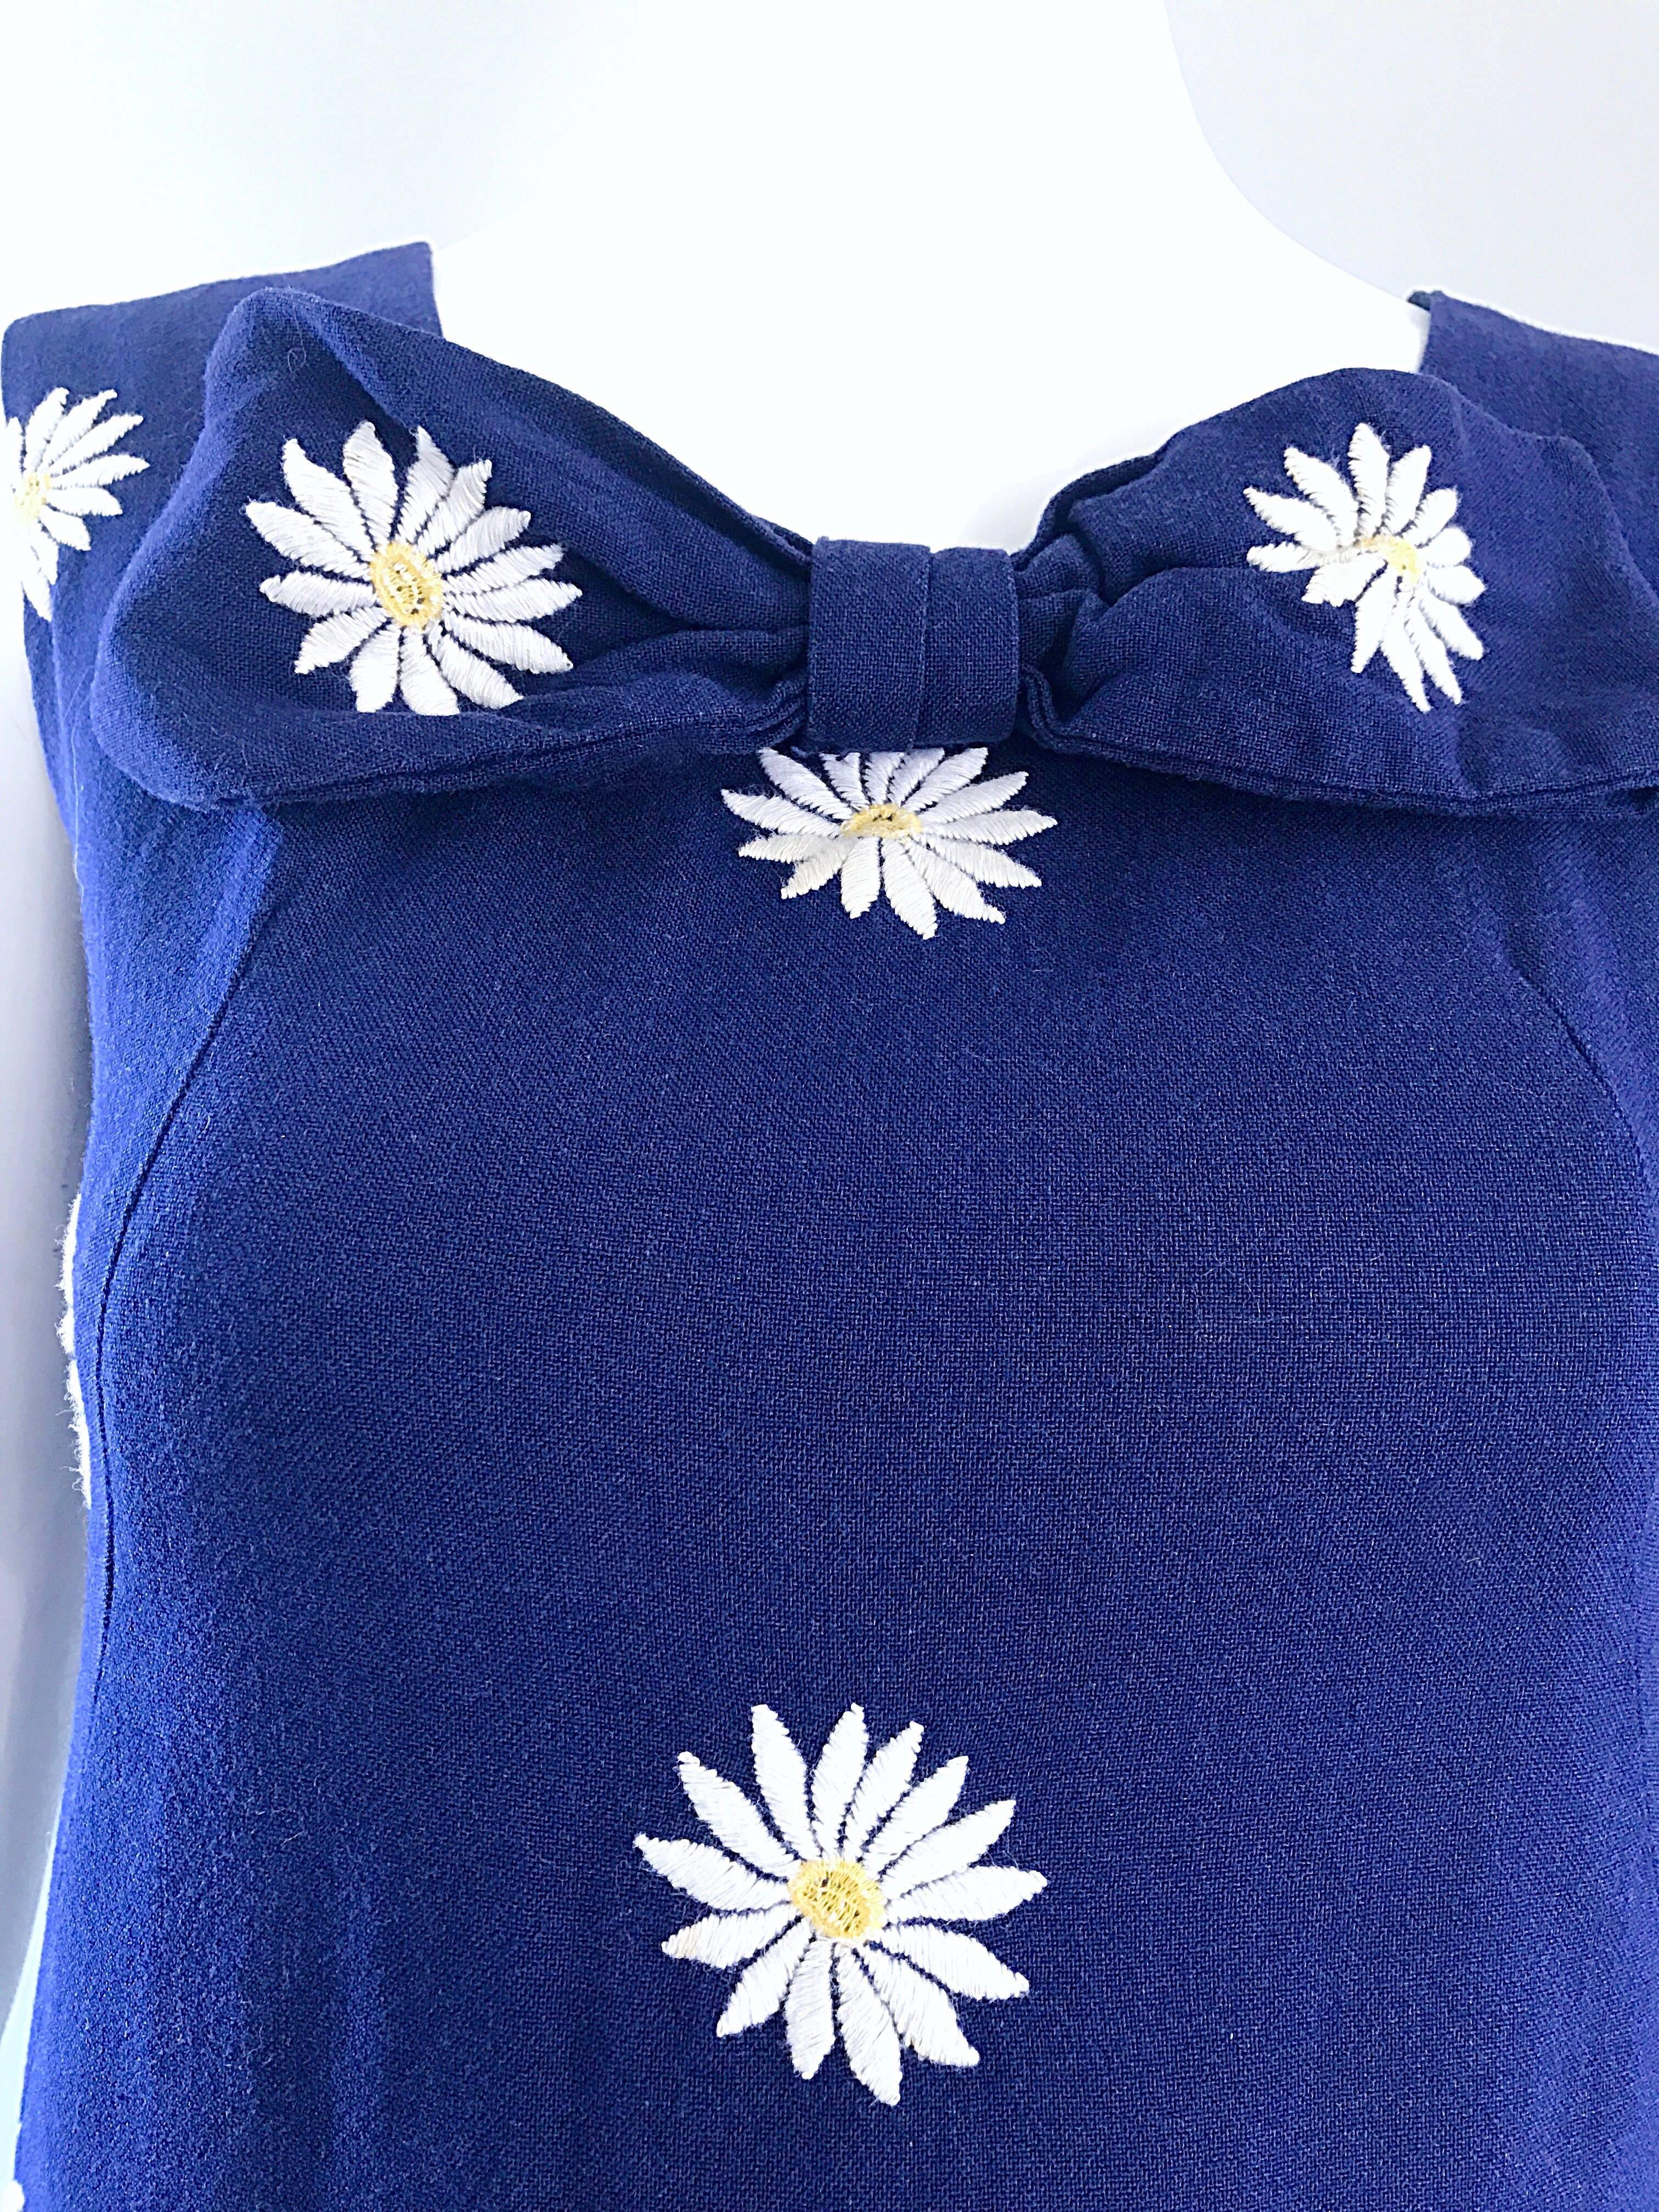 Chic 1960s navy blue cotton daisy print sleeveless shift mini dress! Features embroidered daisies throughout the entire dress. Attached bow detail at neck. High quality toon that holds shape nicely. Full metal zipper up the back with hook-and-eye